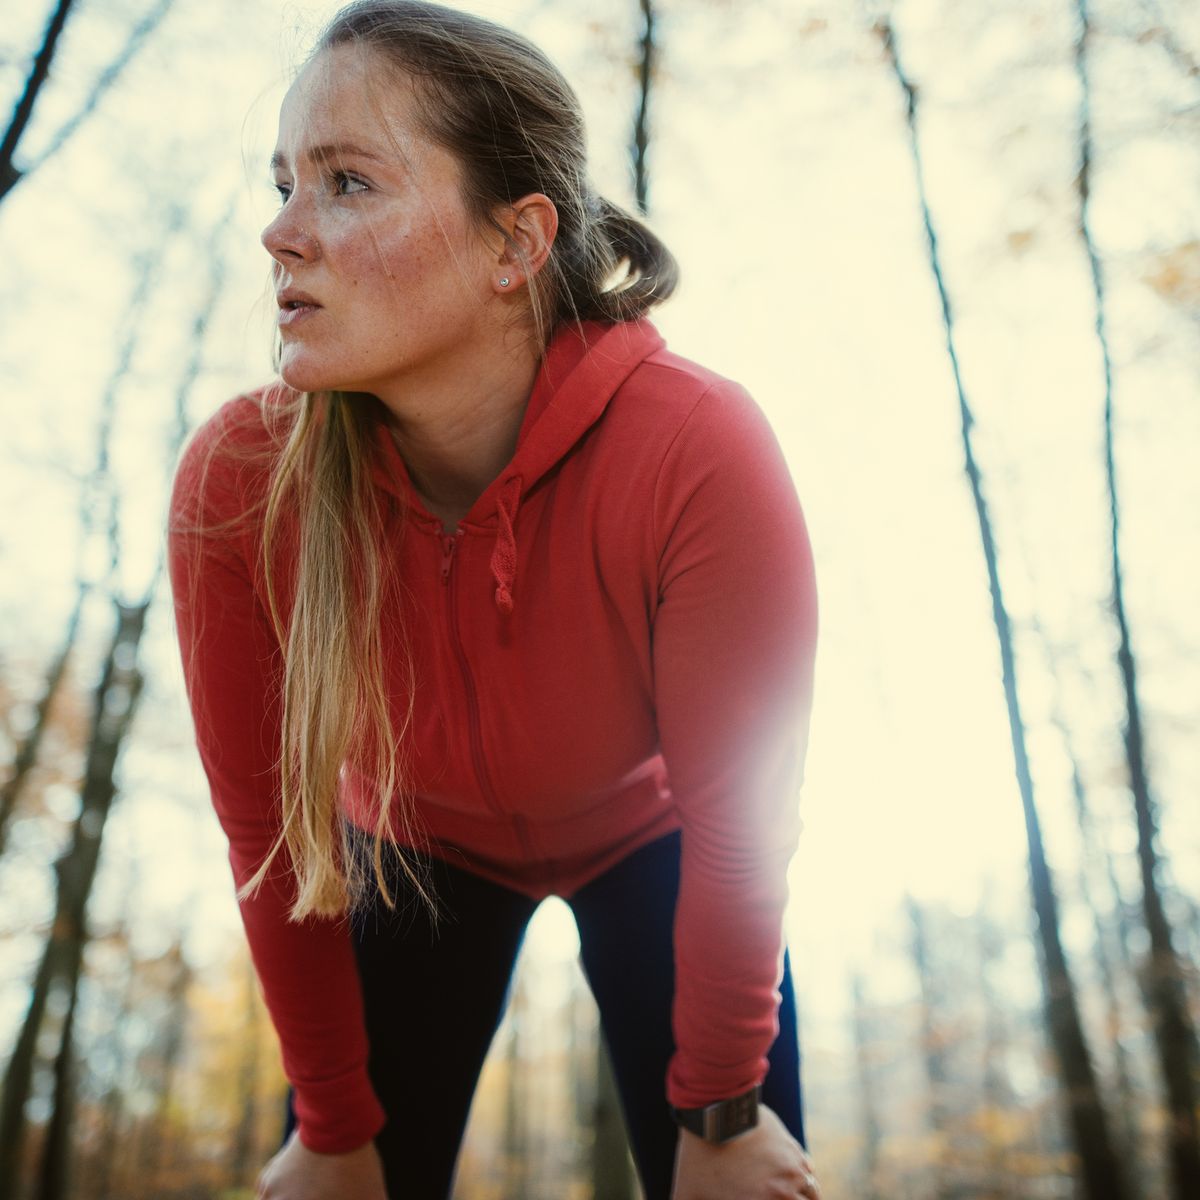 exhausted woman after jogging in autumnal park